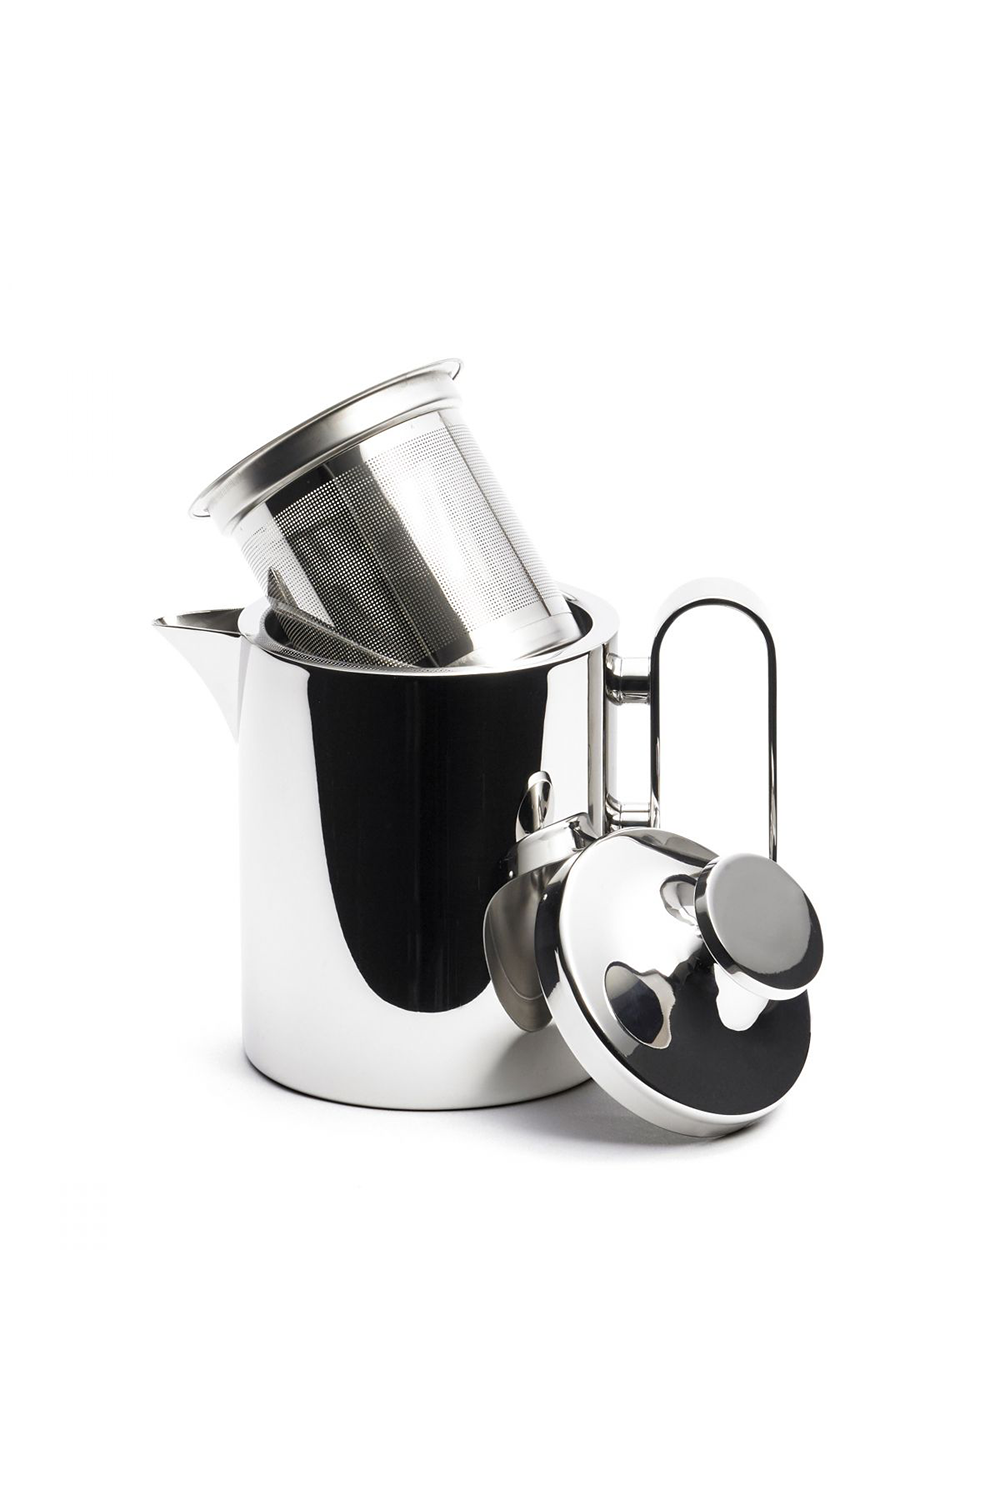 Stainelss steel handle 0.5L teapot